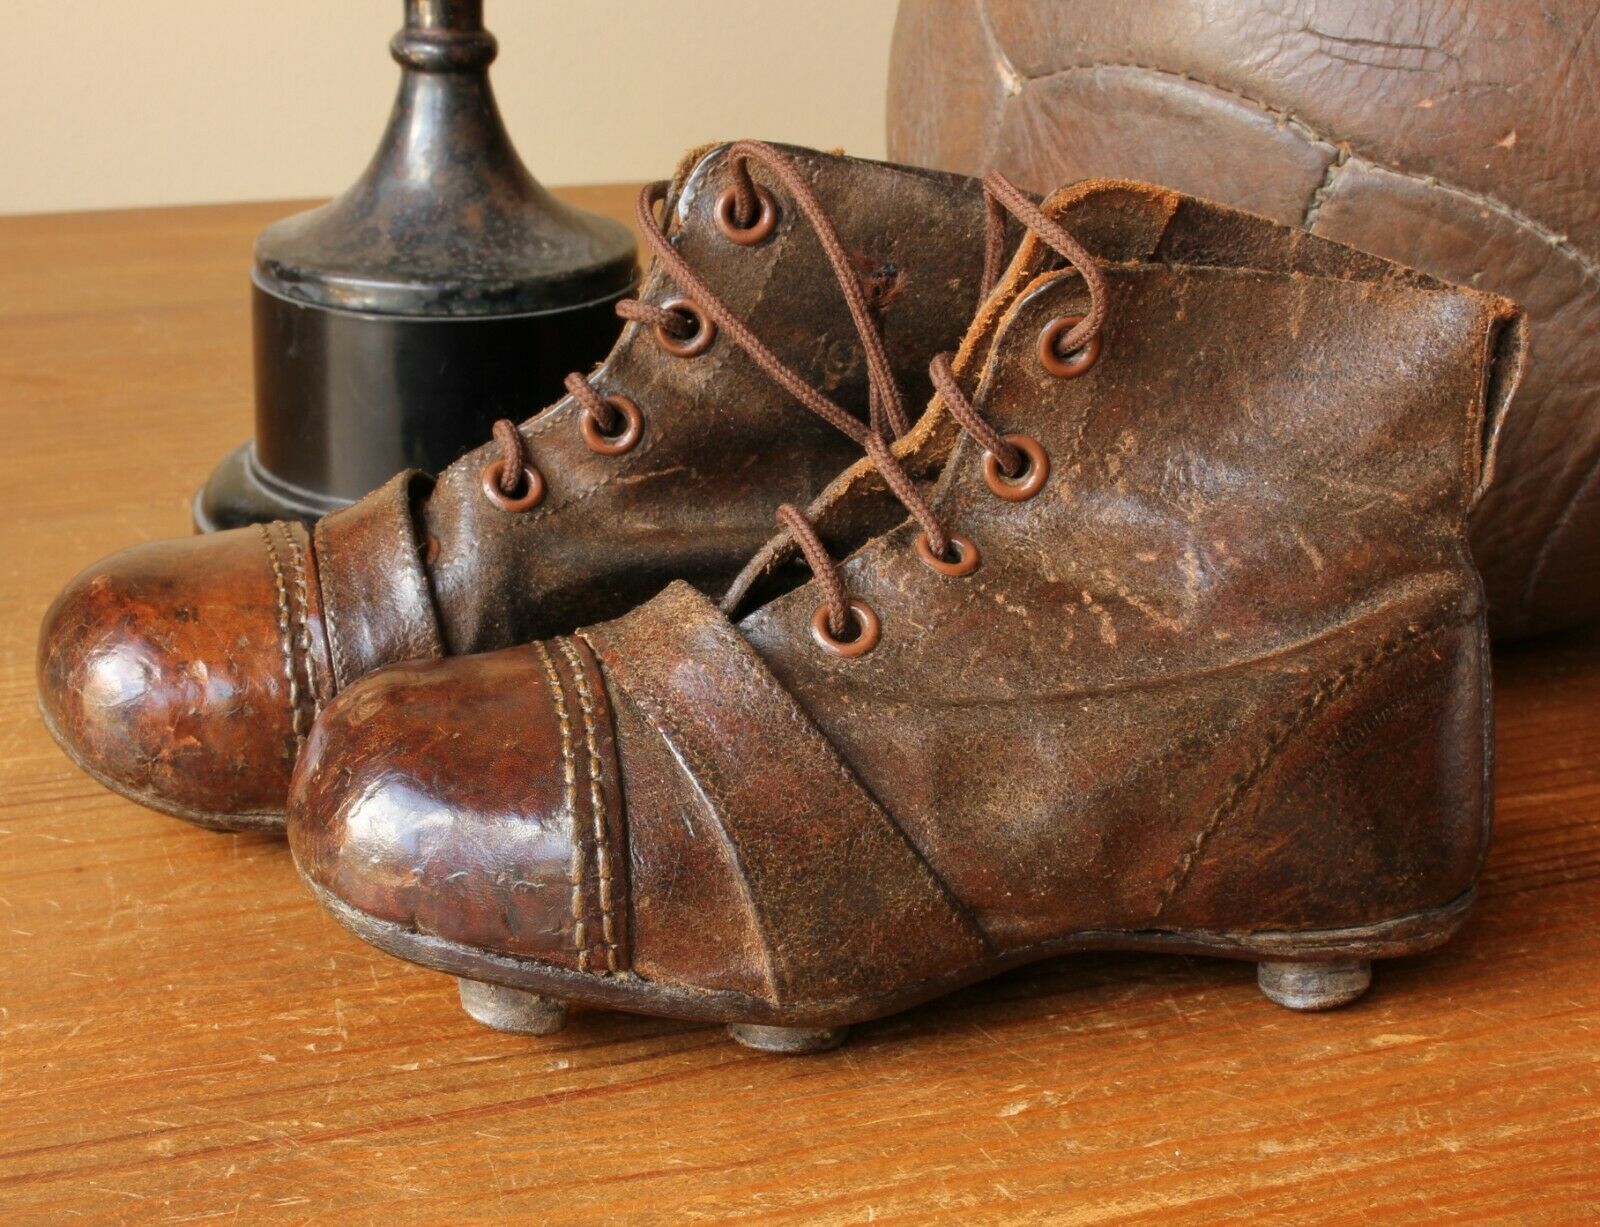 Leather Football Boots. Old Soccer Cleats. Small Child Size 8.